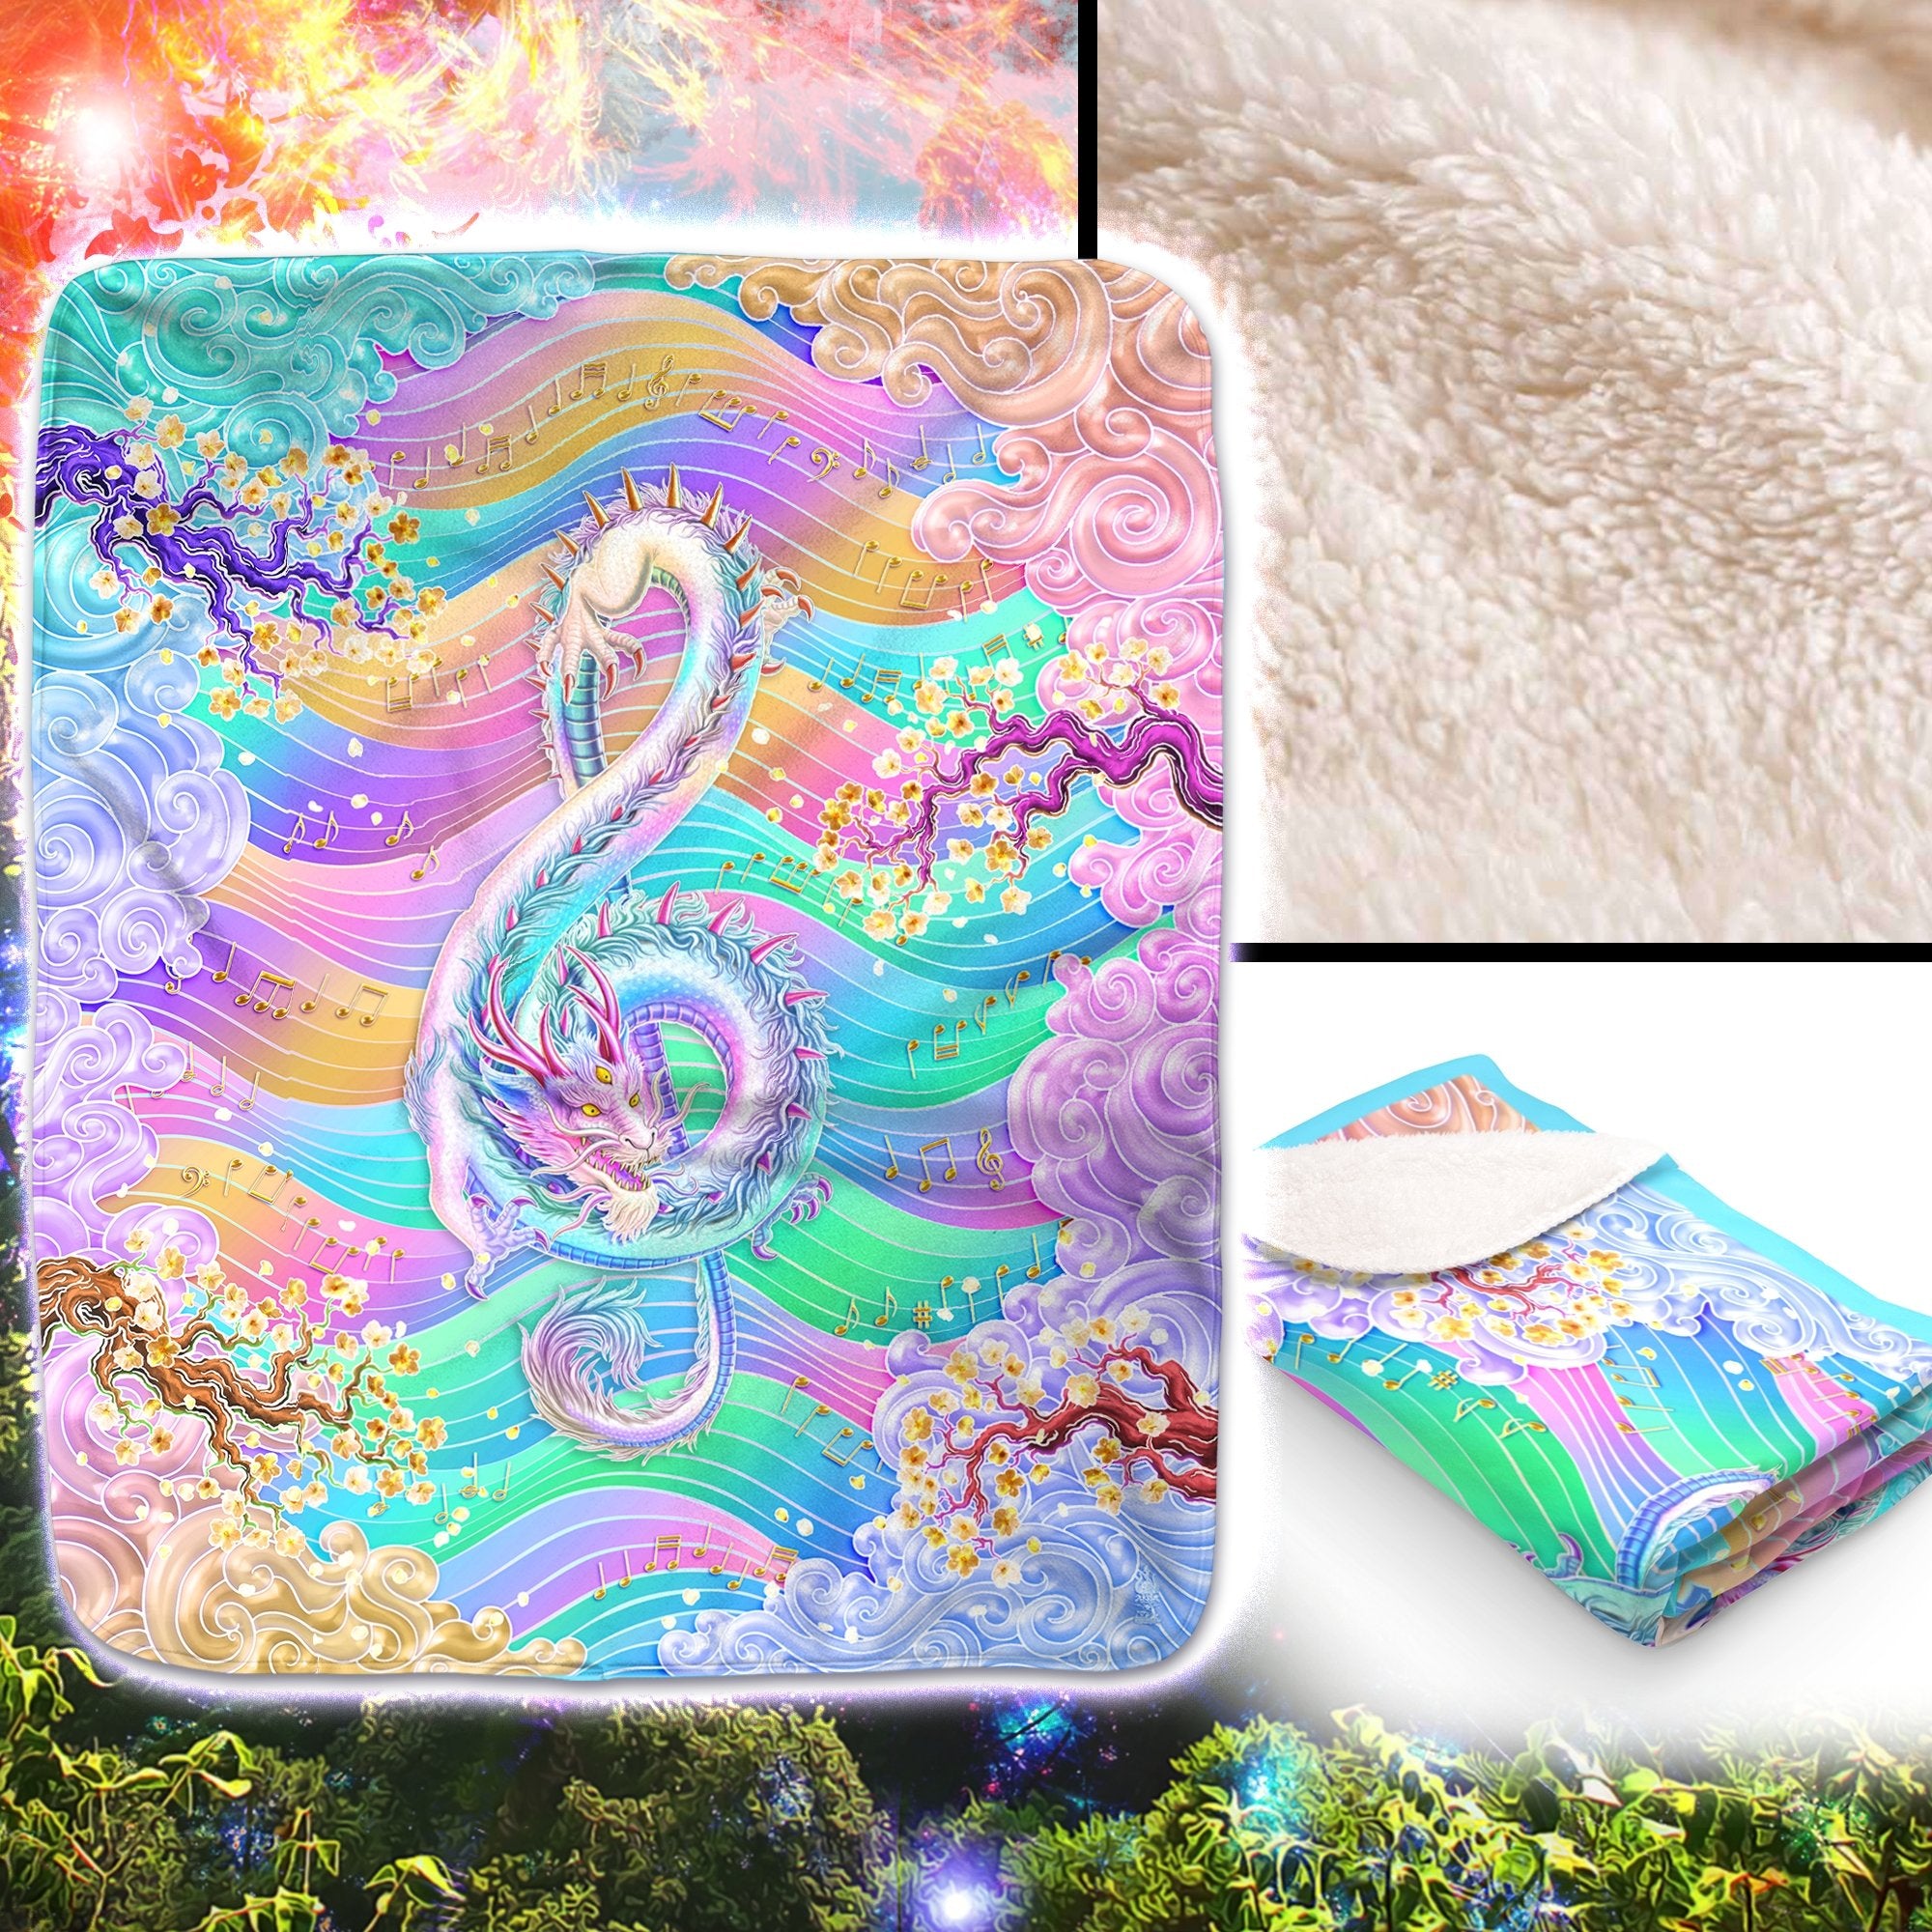 Holographic Dragon Throw Fleece Blanket, Treble Clef, Music Art, Aesthetic Decor, Eclectic and Funky Gift - Pastel Dragon - Abysm Internal